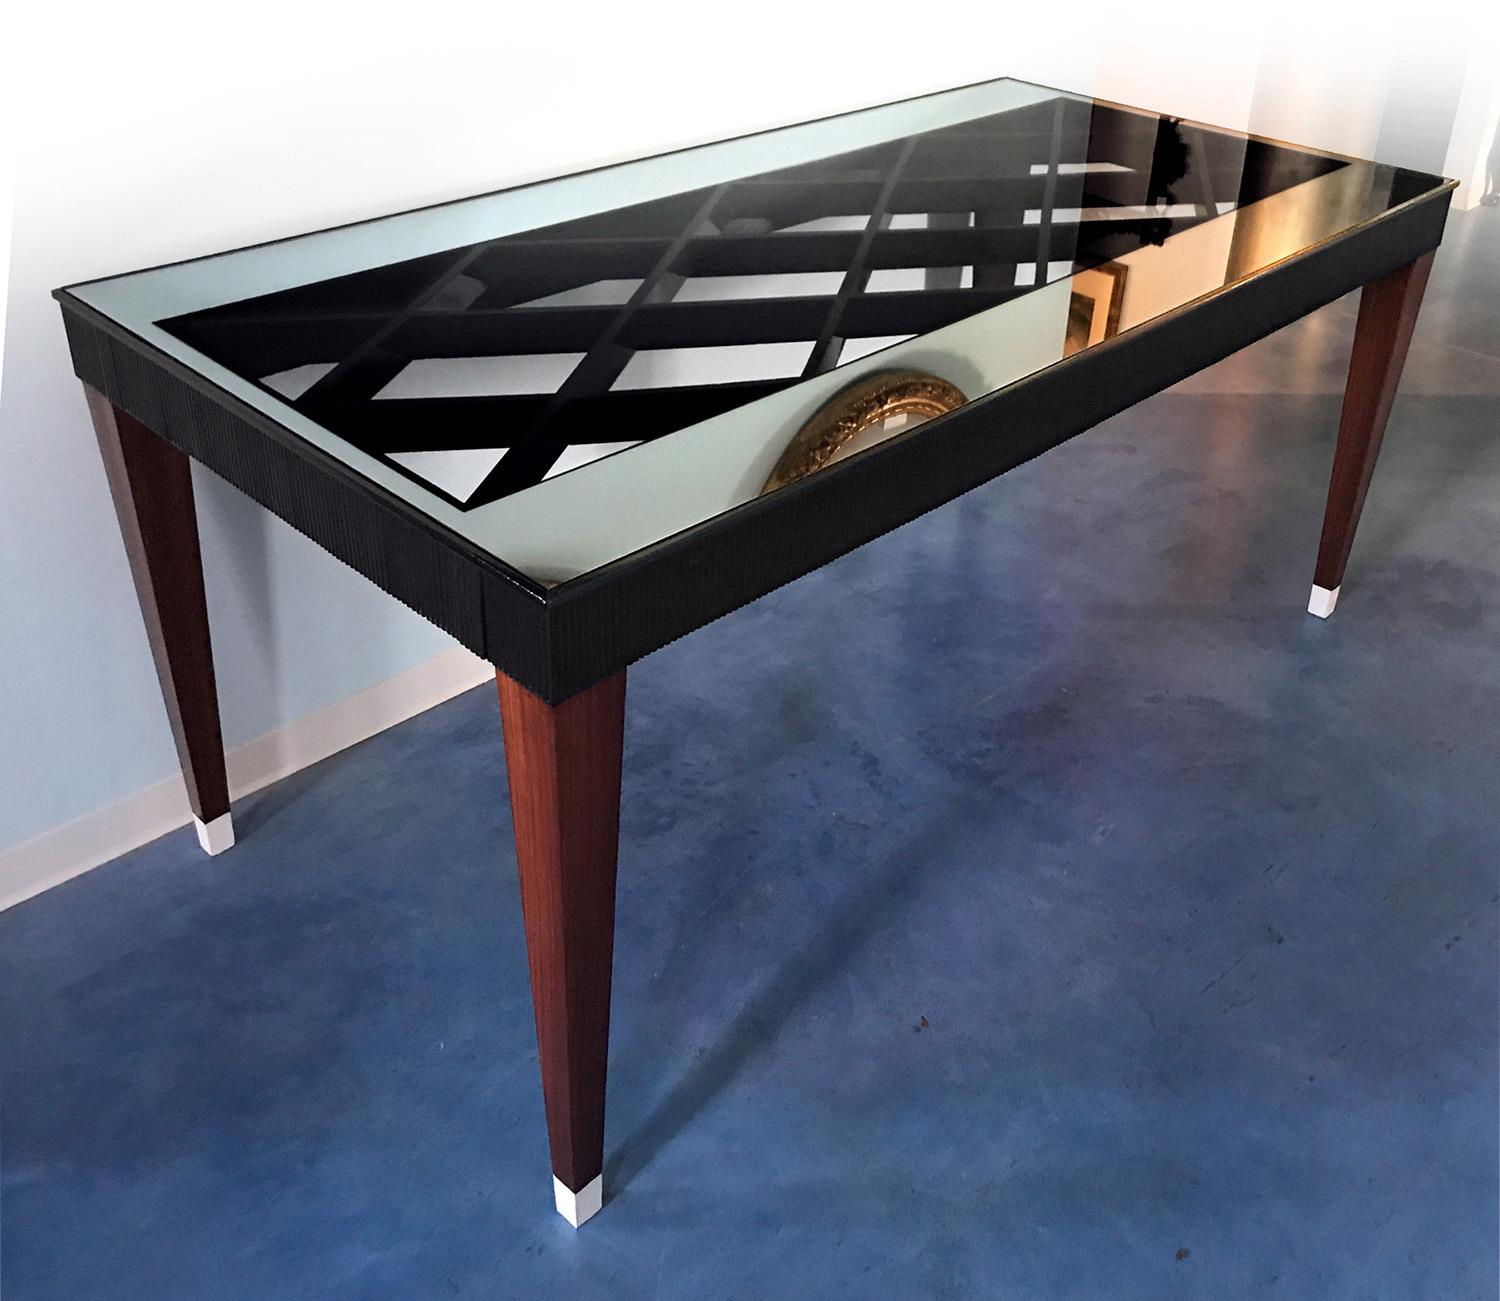 The design of this marvellous dining Table is attributed to Paolo Buffa in the 1950s.
It has a unique sculptured design, very stylish and charming, characterized by structure with geometric shapes made in lacquered black wood, with side edges